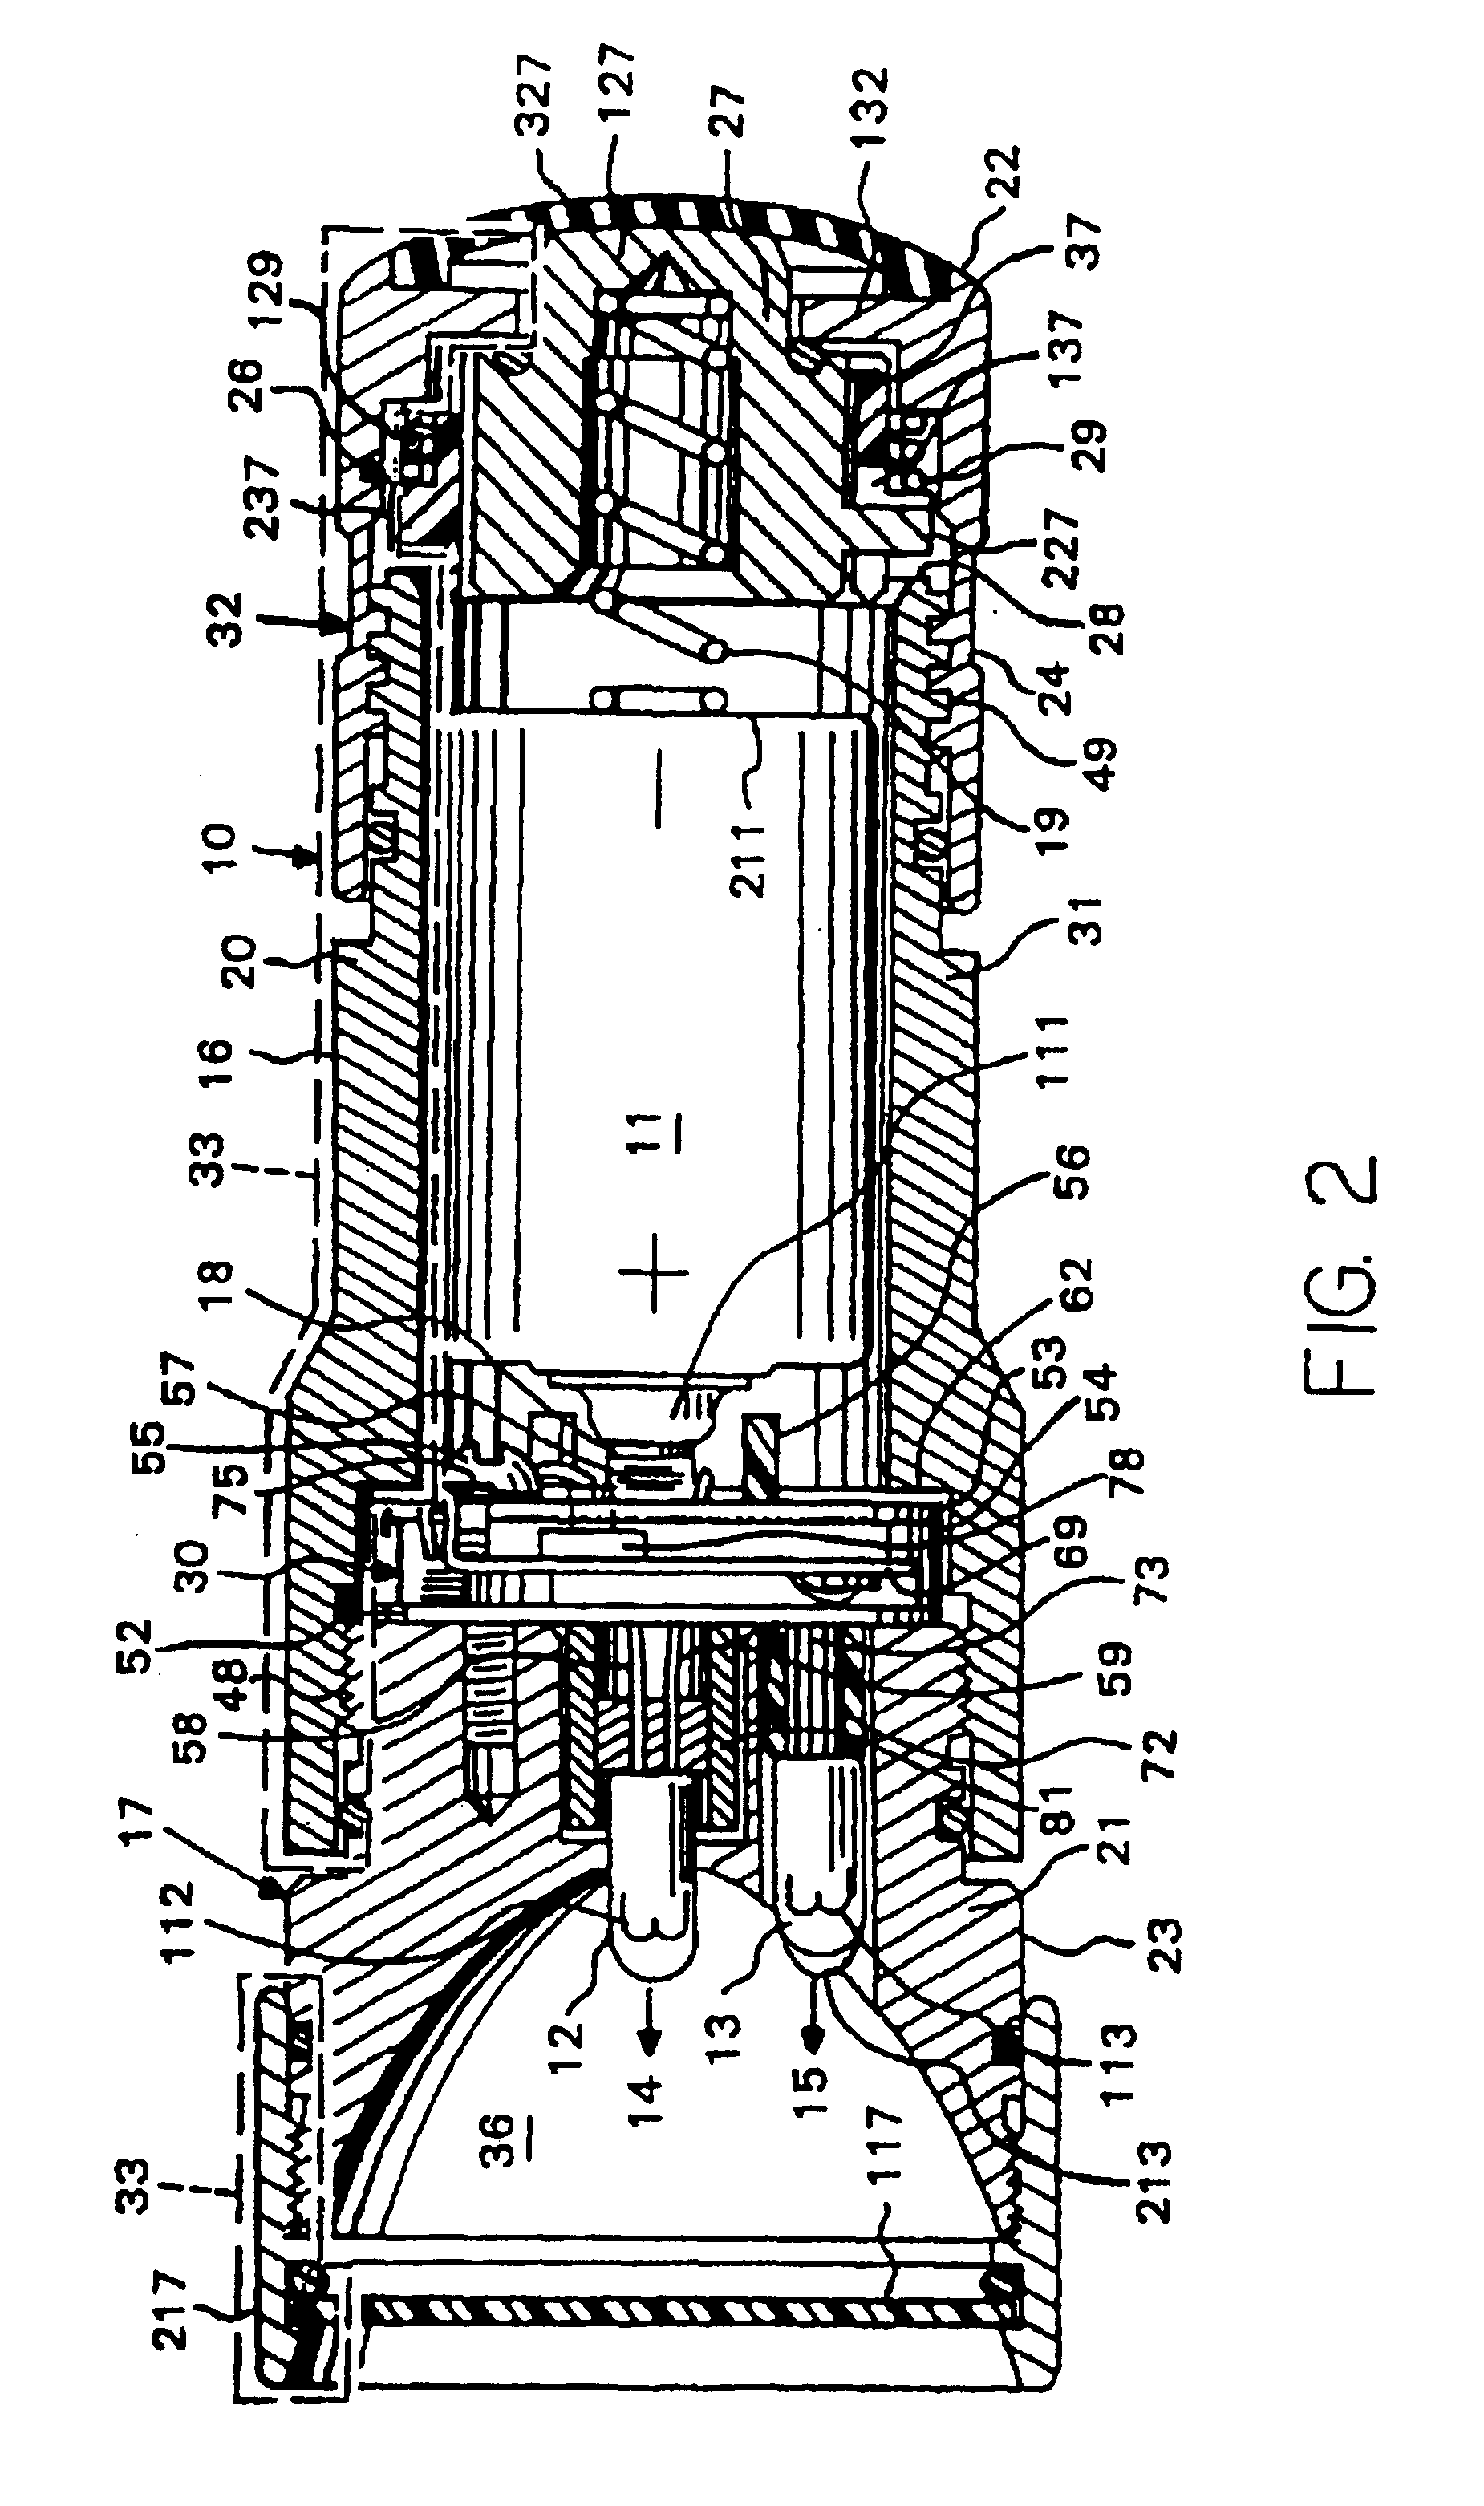 Flashlights and other battery-powered apparatus for holding and energizing transducers